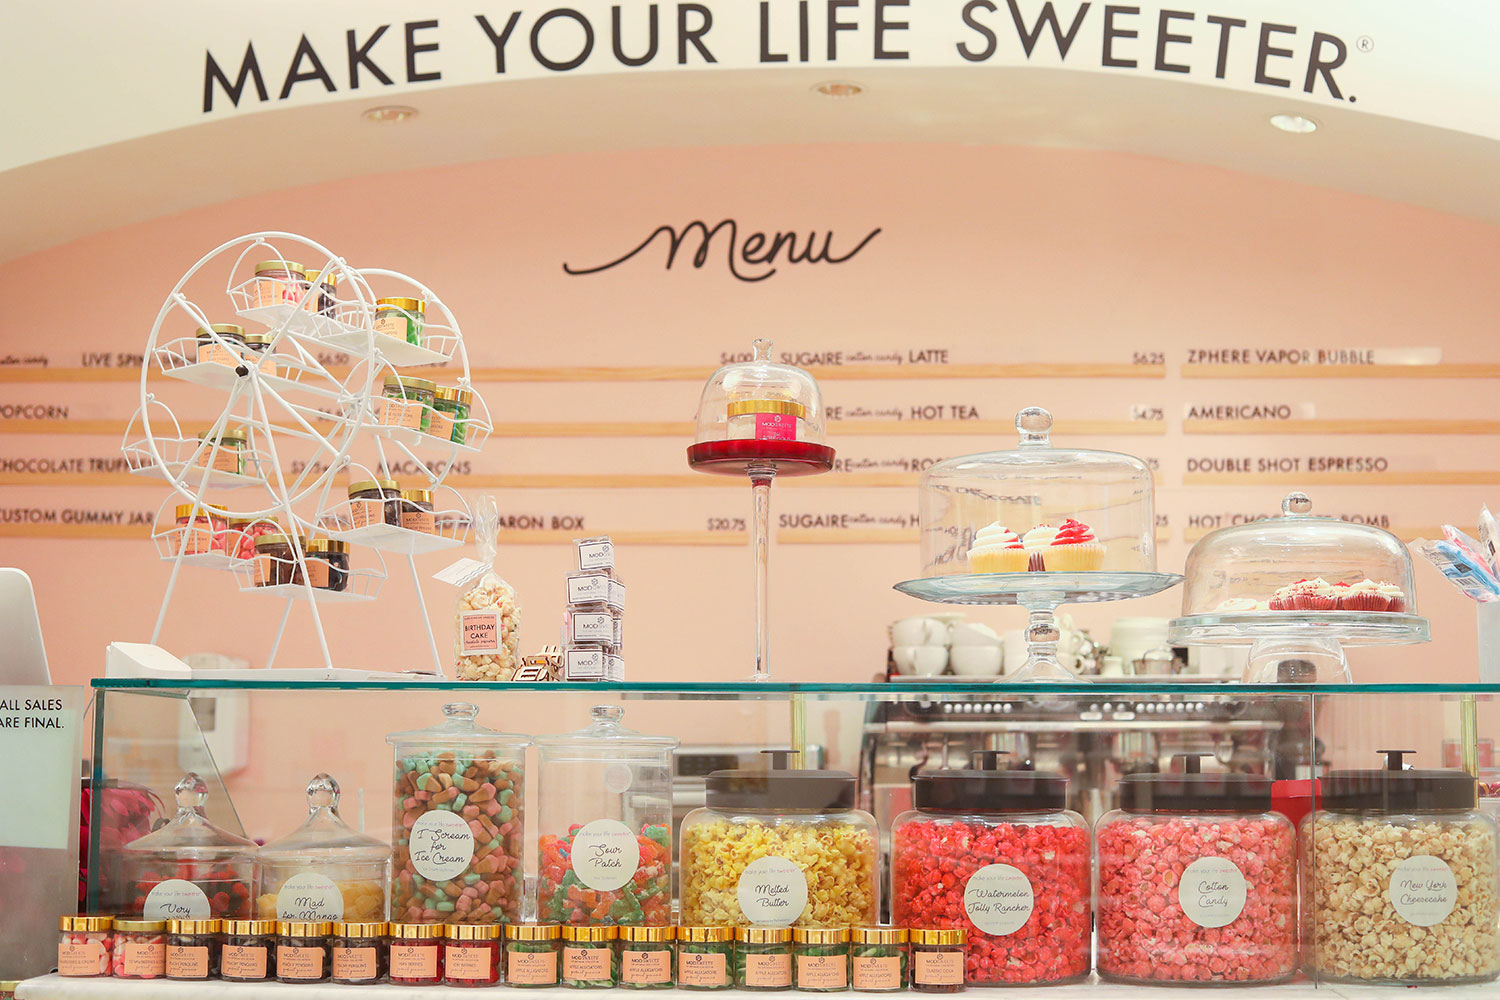 Make Your Life Sweeter pop-up shop in Galleria Dallas